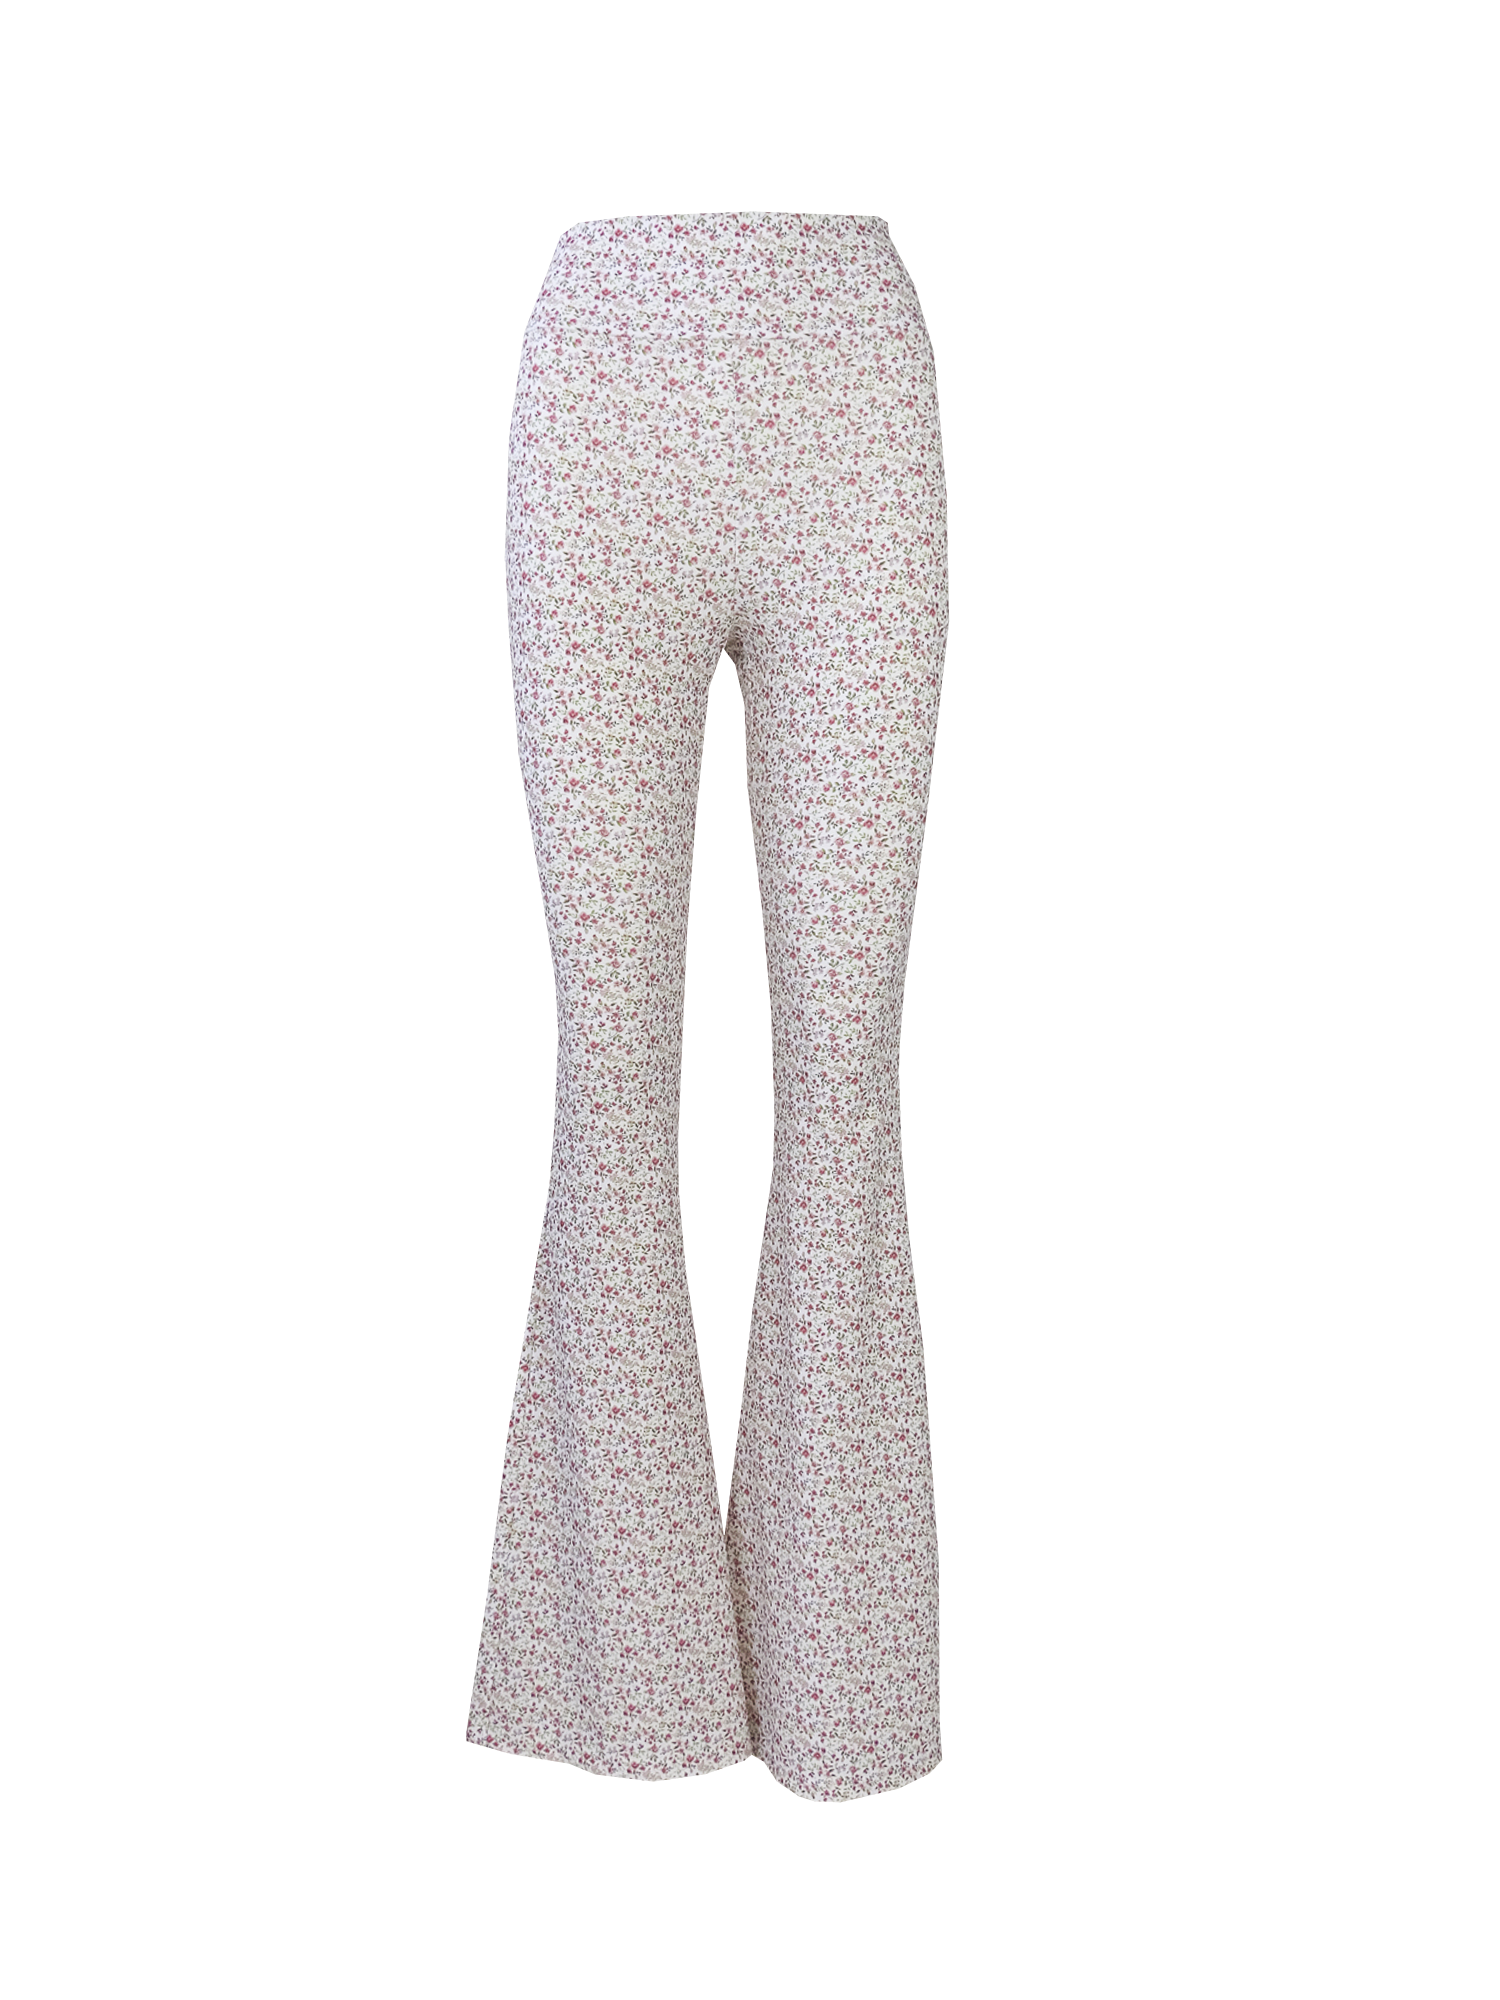 LOLA - flared pants in Roses patterned lycra